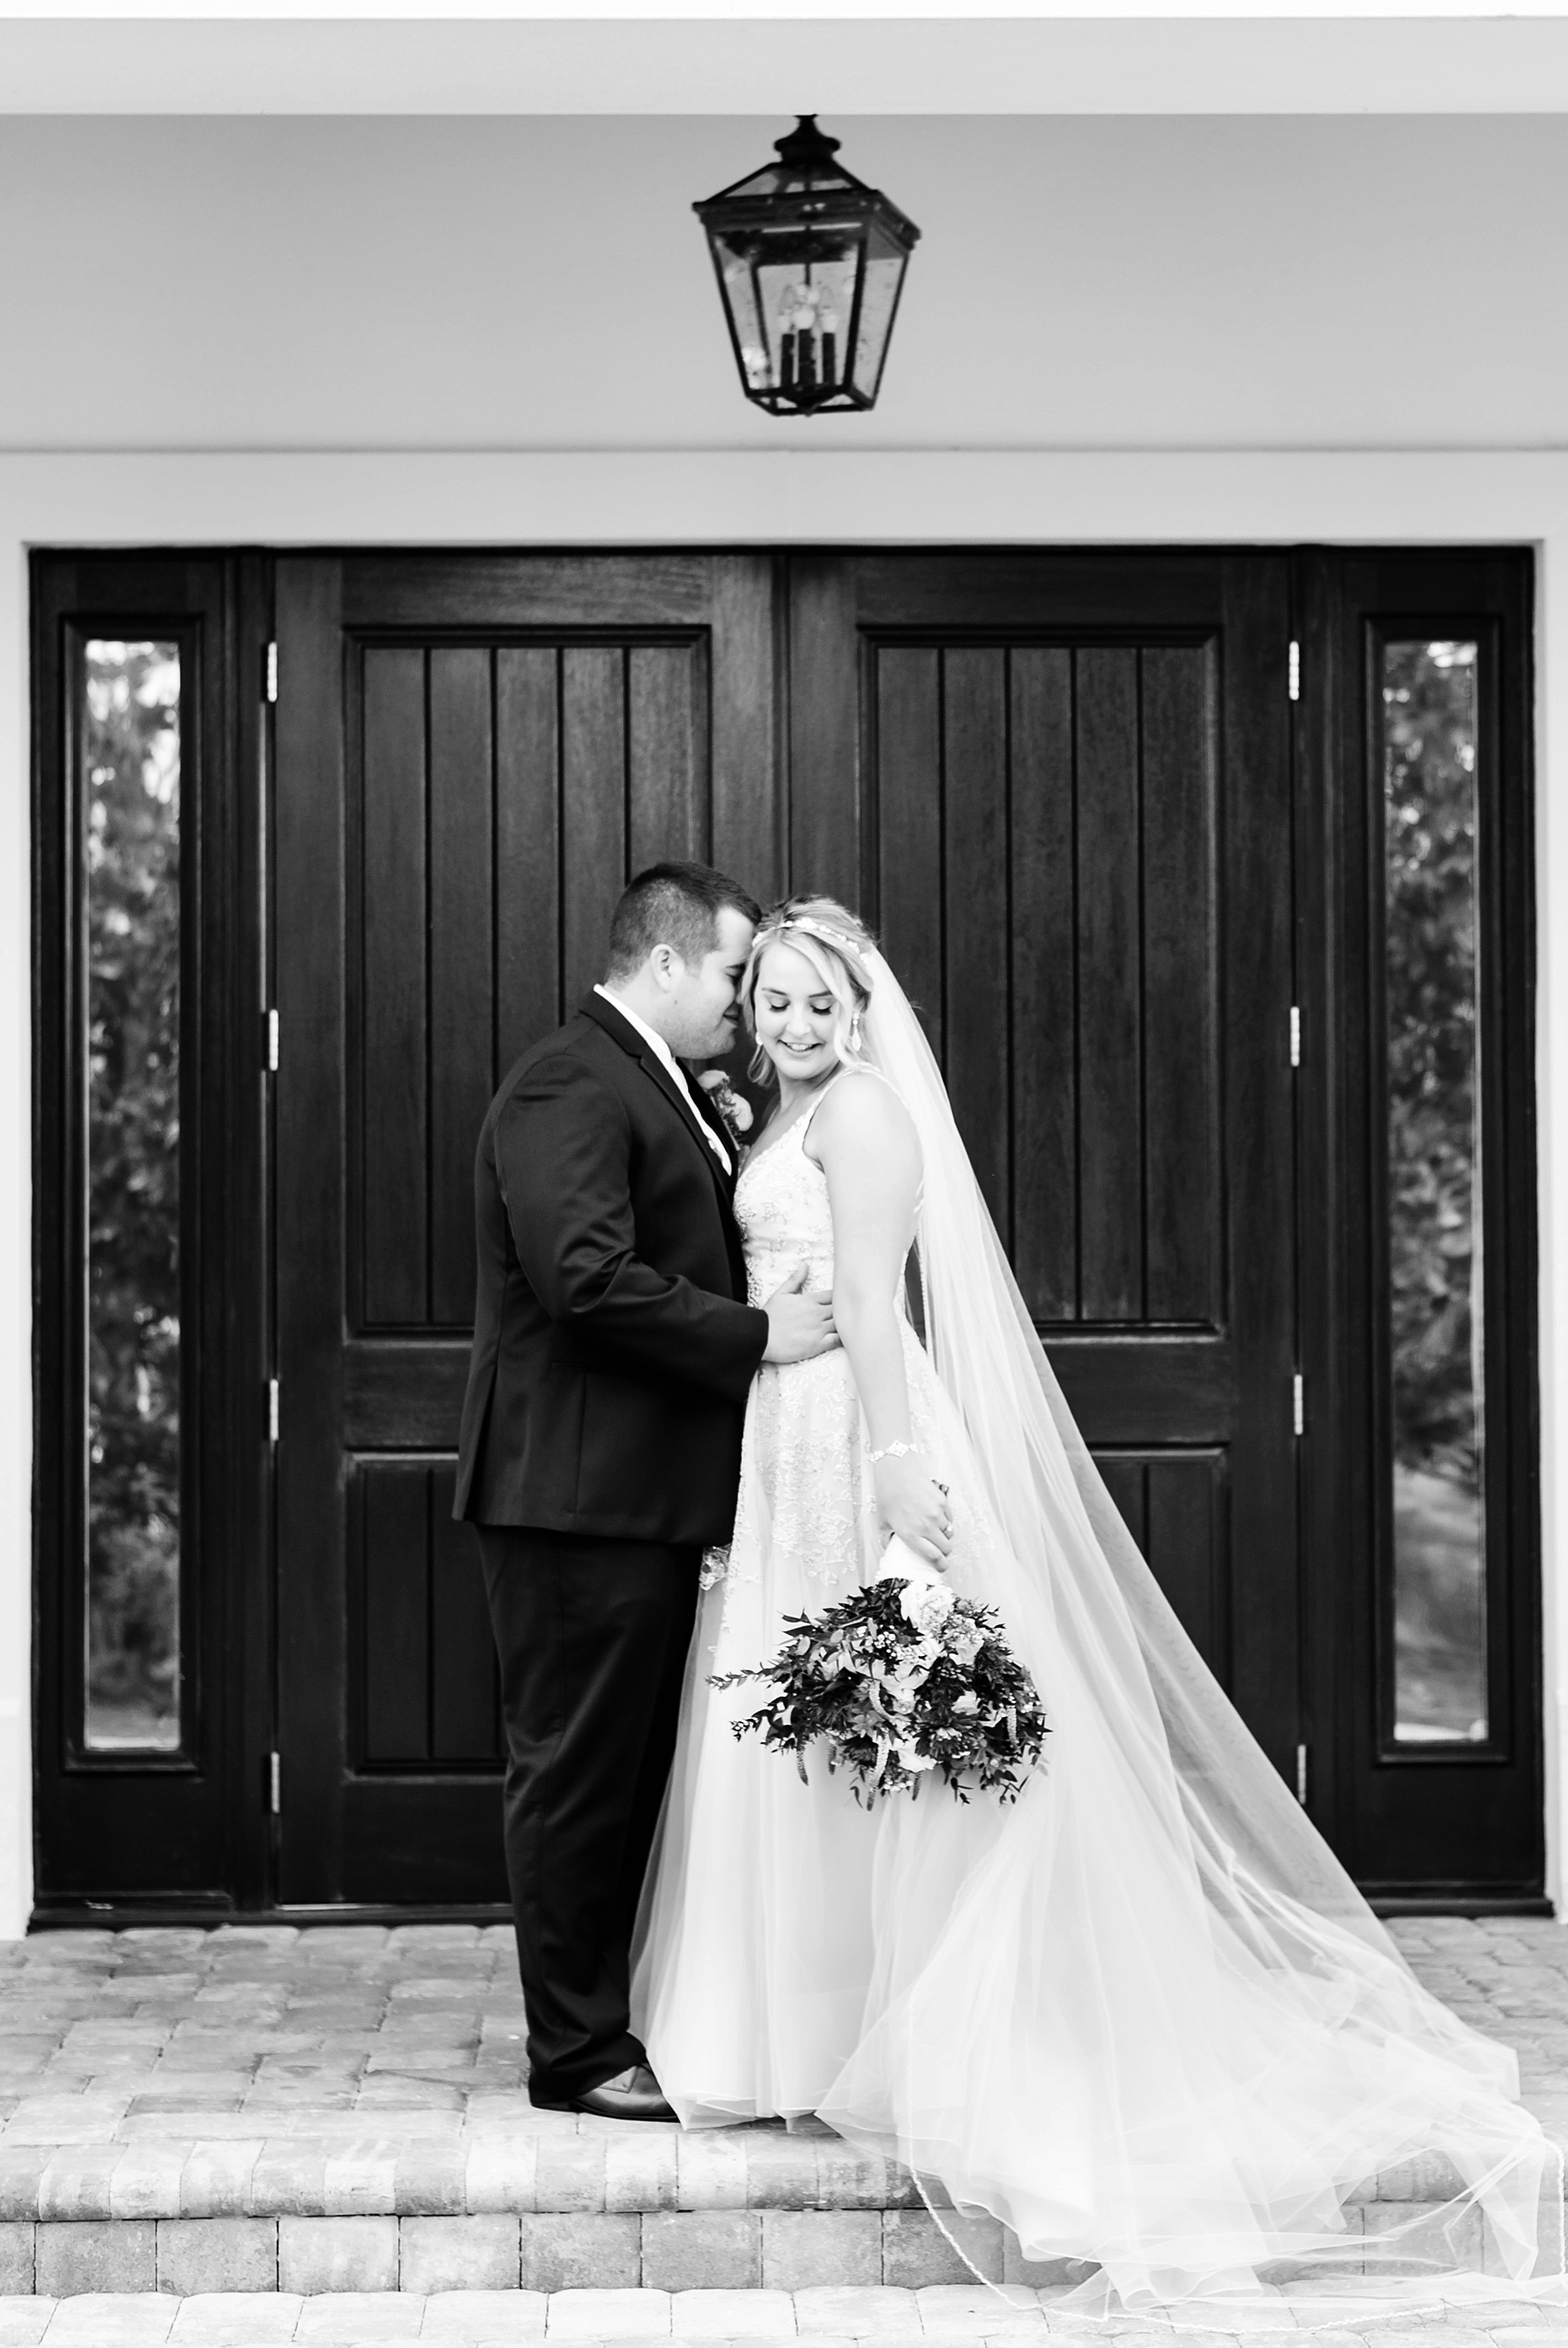 Black and white portrait of the Bride and Groom under a lantern